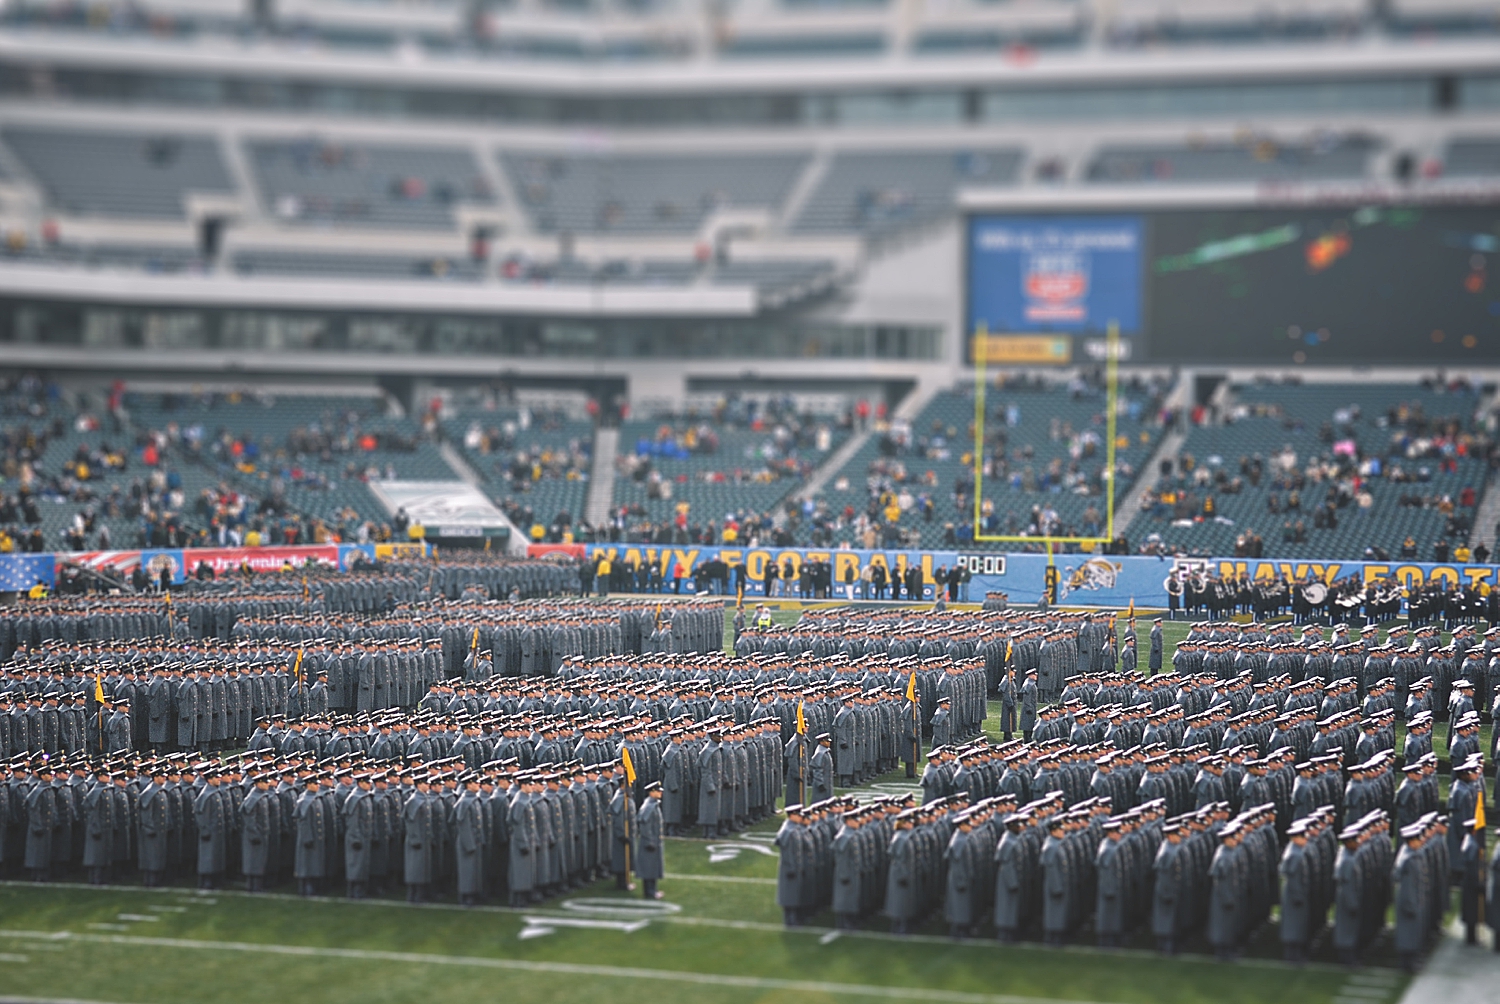 2-army-cadets-on-field.jpg